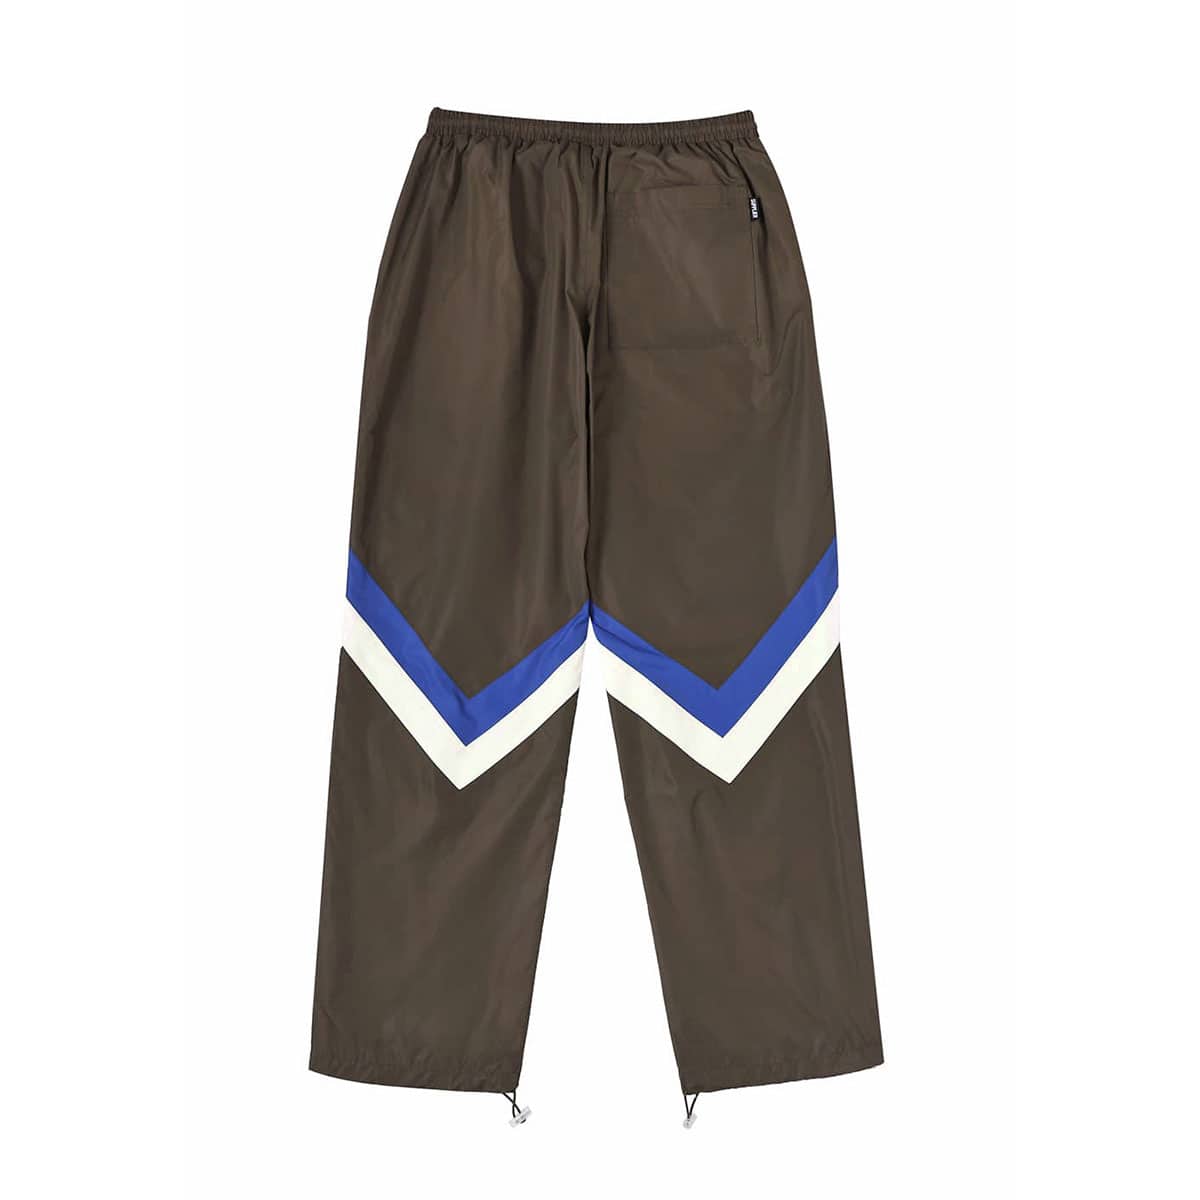 SUPPLIER SWITCHED TRACK PANTS KHAKI 22SP-I